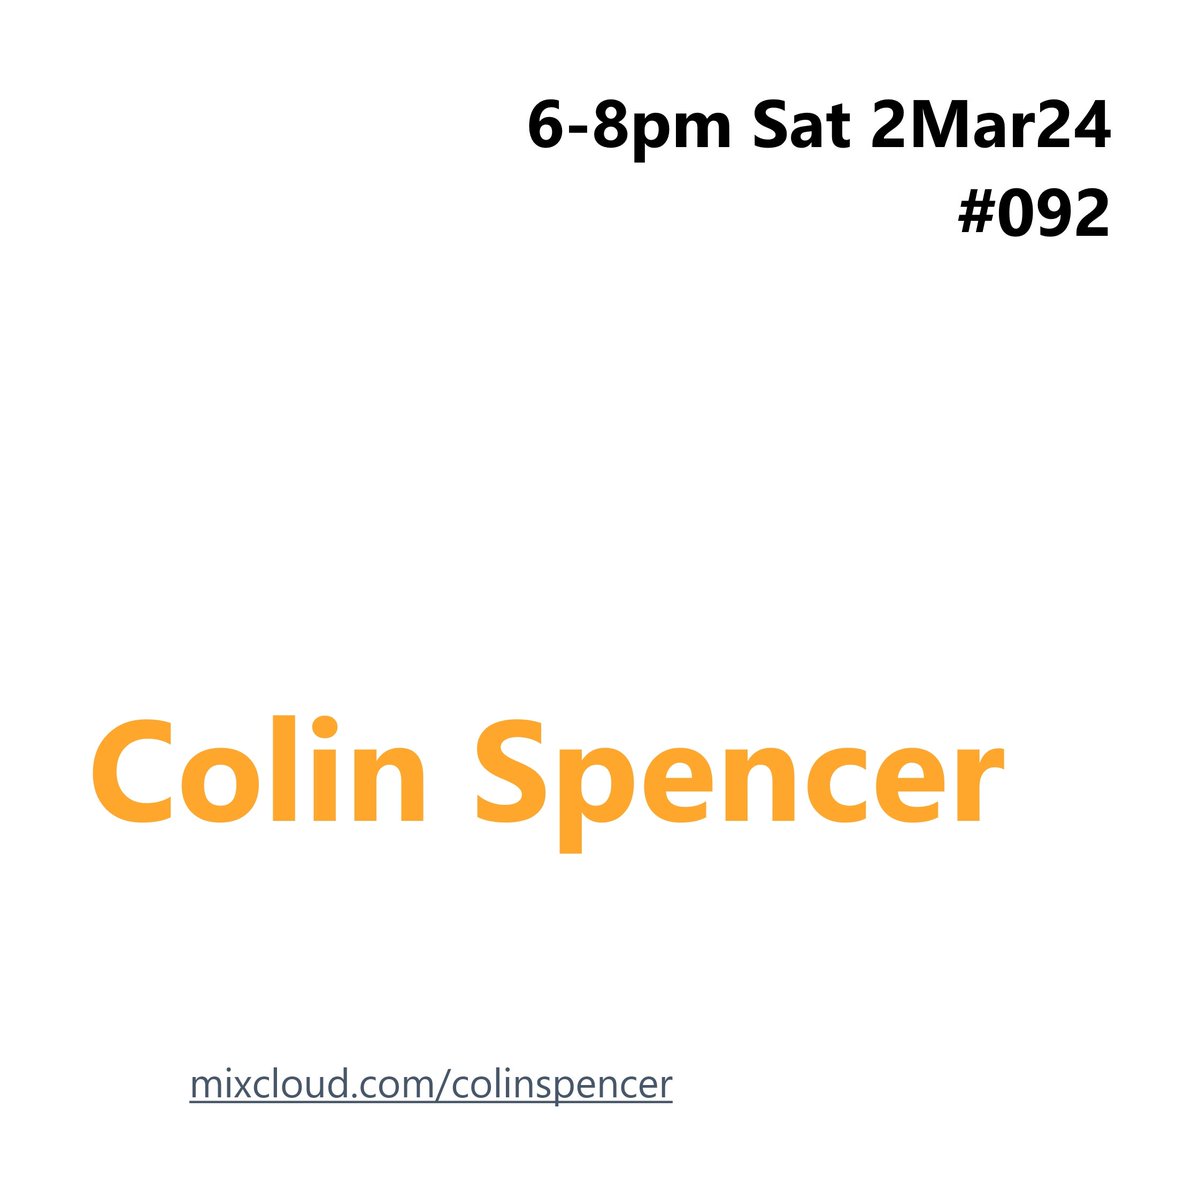 Artists with #NewMusic during #ColinSpencer Programme #091 #Helix 🔊mixcloud.com/colinspencer/🎧 Saturday 24 February 2024 6-8pm (#UK times) #DiscoverAndRemember @helixband23 Audio treasures also available throughout catch-up #081 ▶️mixcloud.com/ColinSpencer/c… #ElectronicMusic